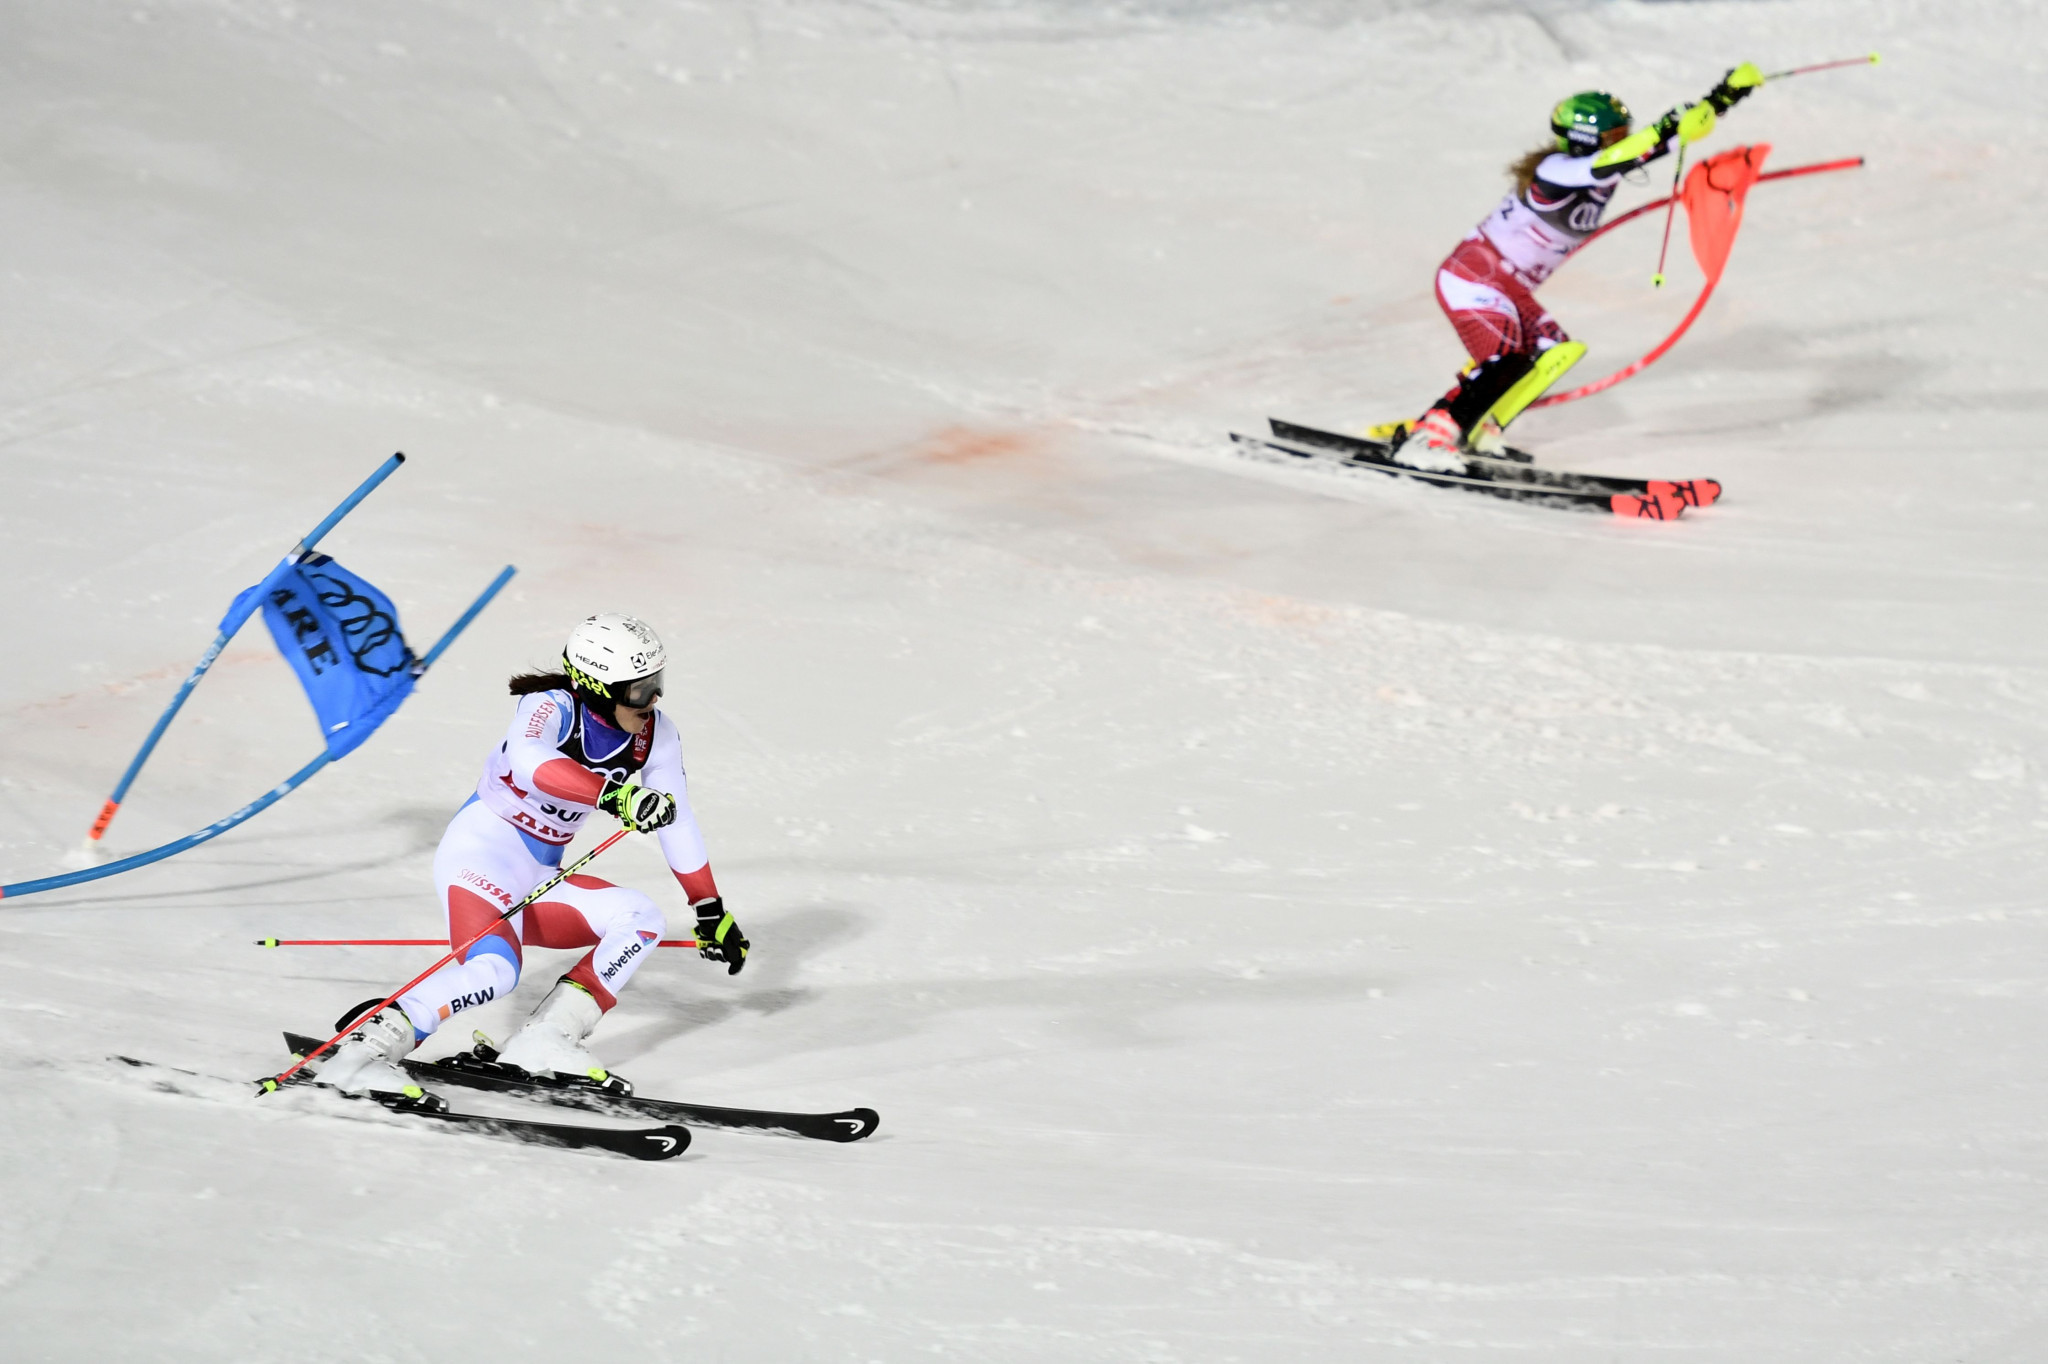 Switzerland defeated Austria in the final of the parallel slalom competition ©Getty Images